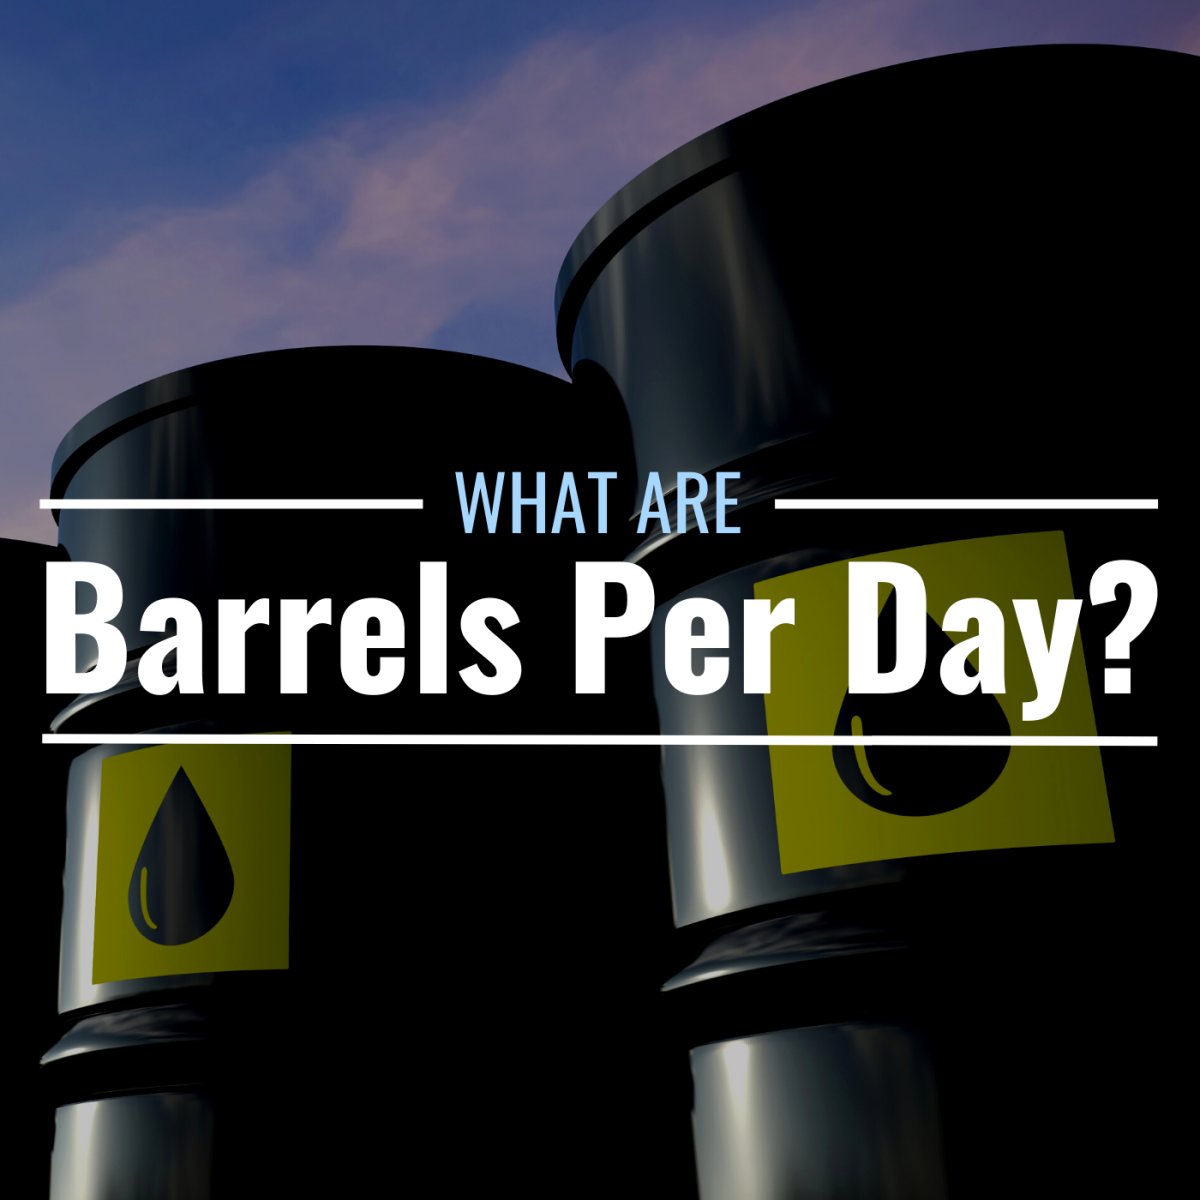 Photo of barrels containing crude oil with text overlay that reads "What Are Barrels Per Day?"